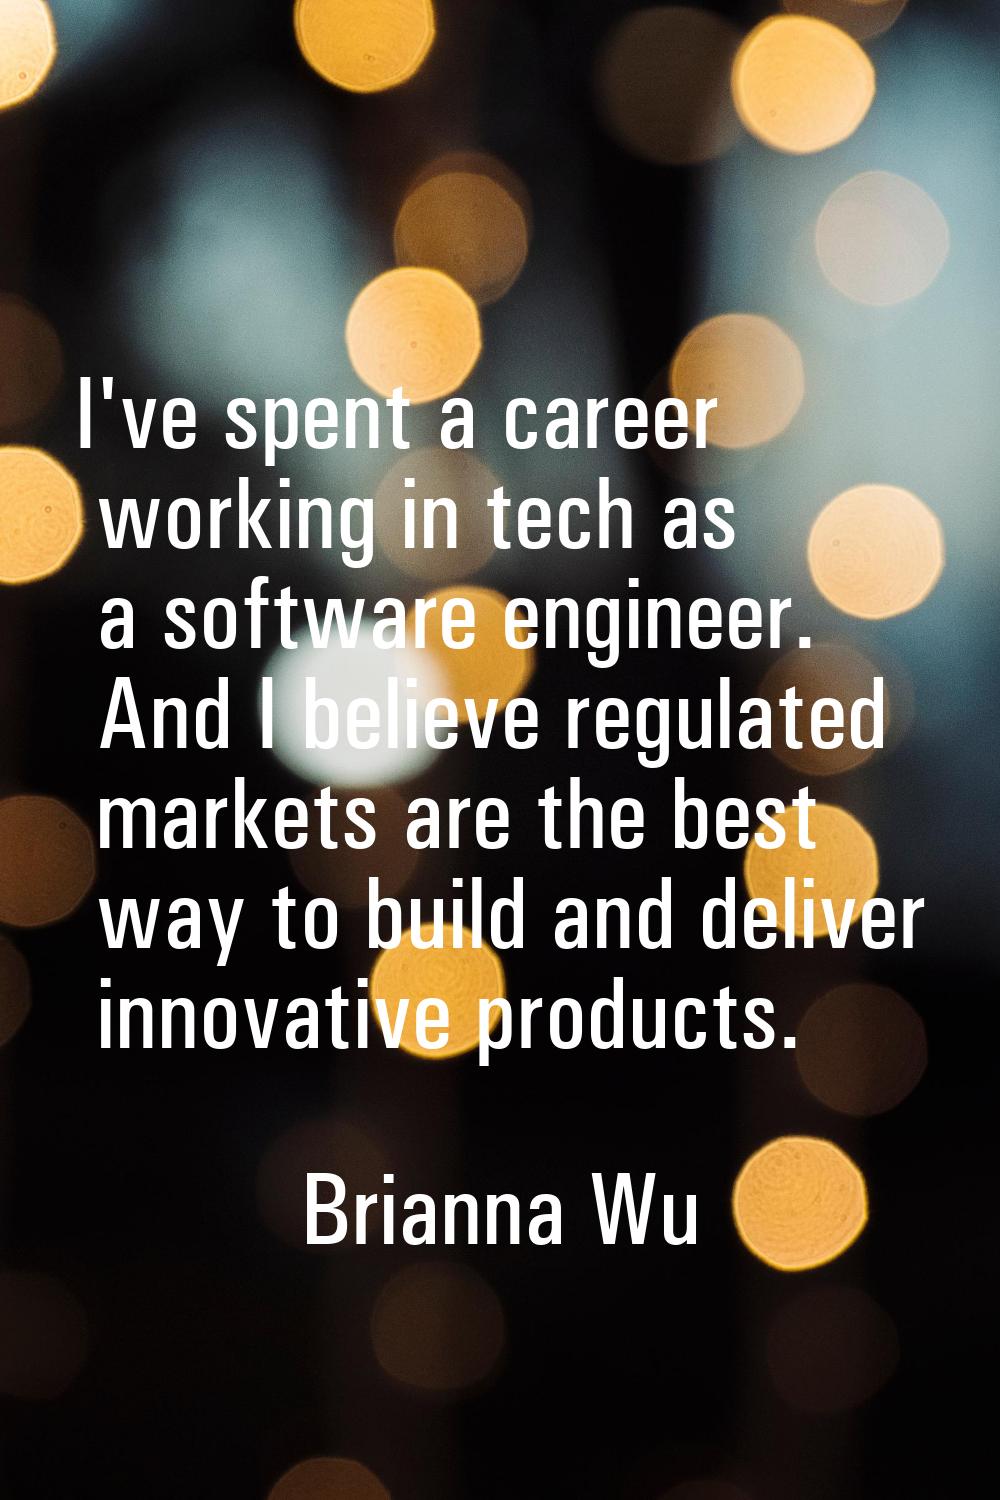 I've spent a career working in tech as a software engineer. And I believe regulated markets are the